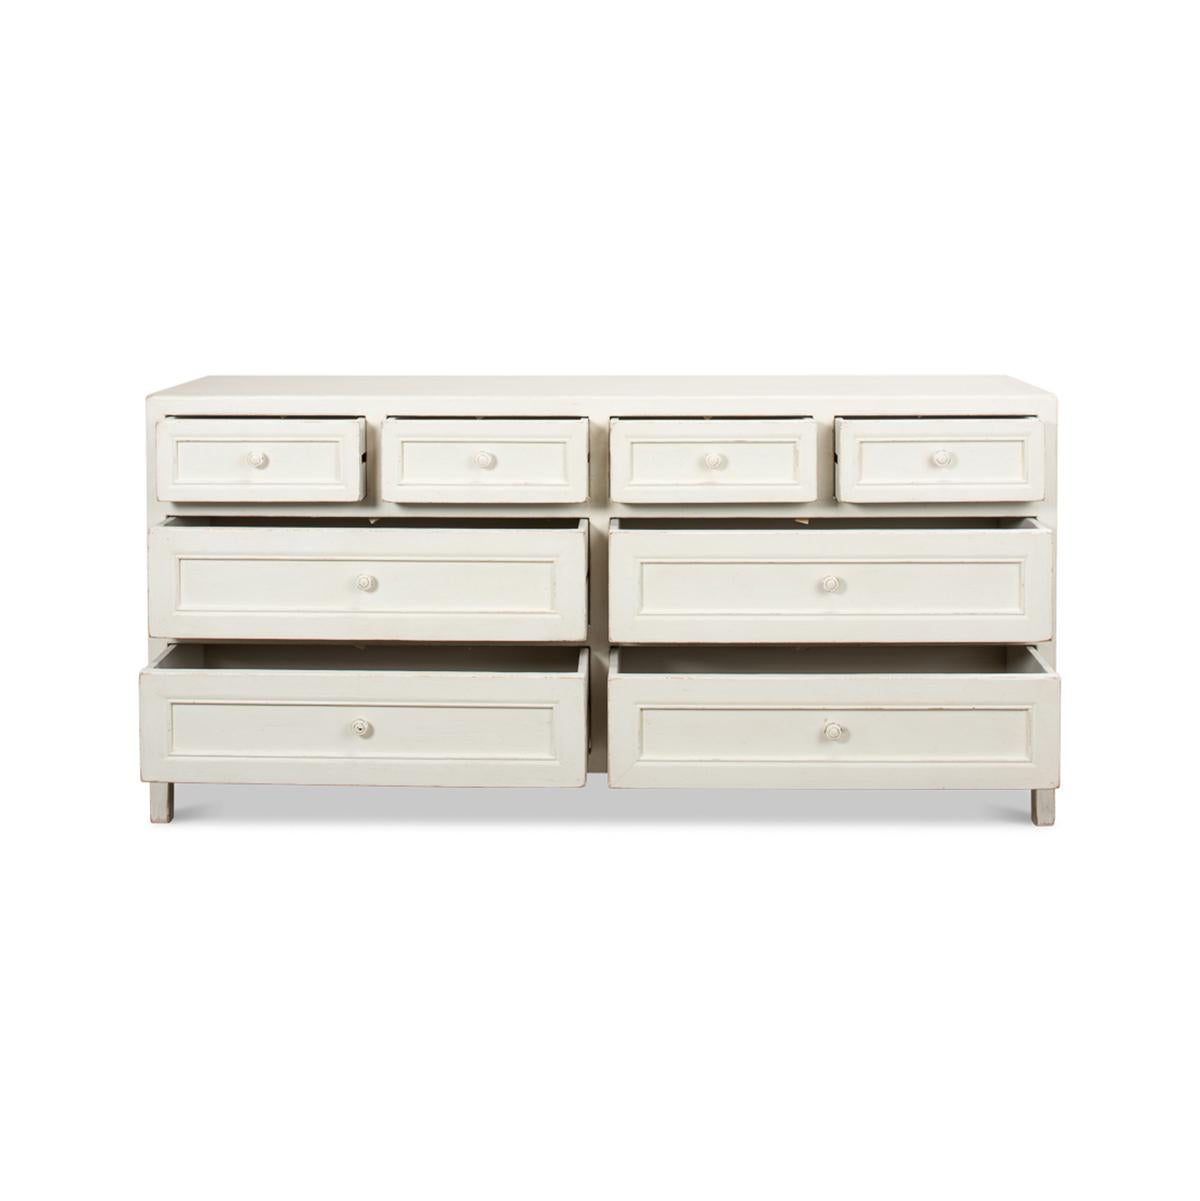 Antiqued White Rustic Painted Dresser For Sale 2